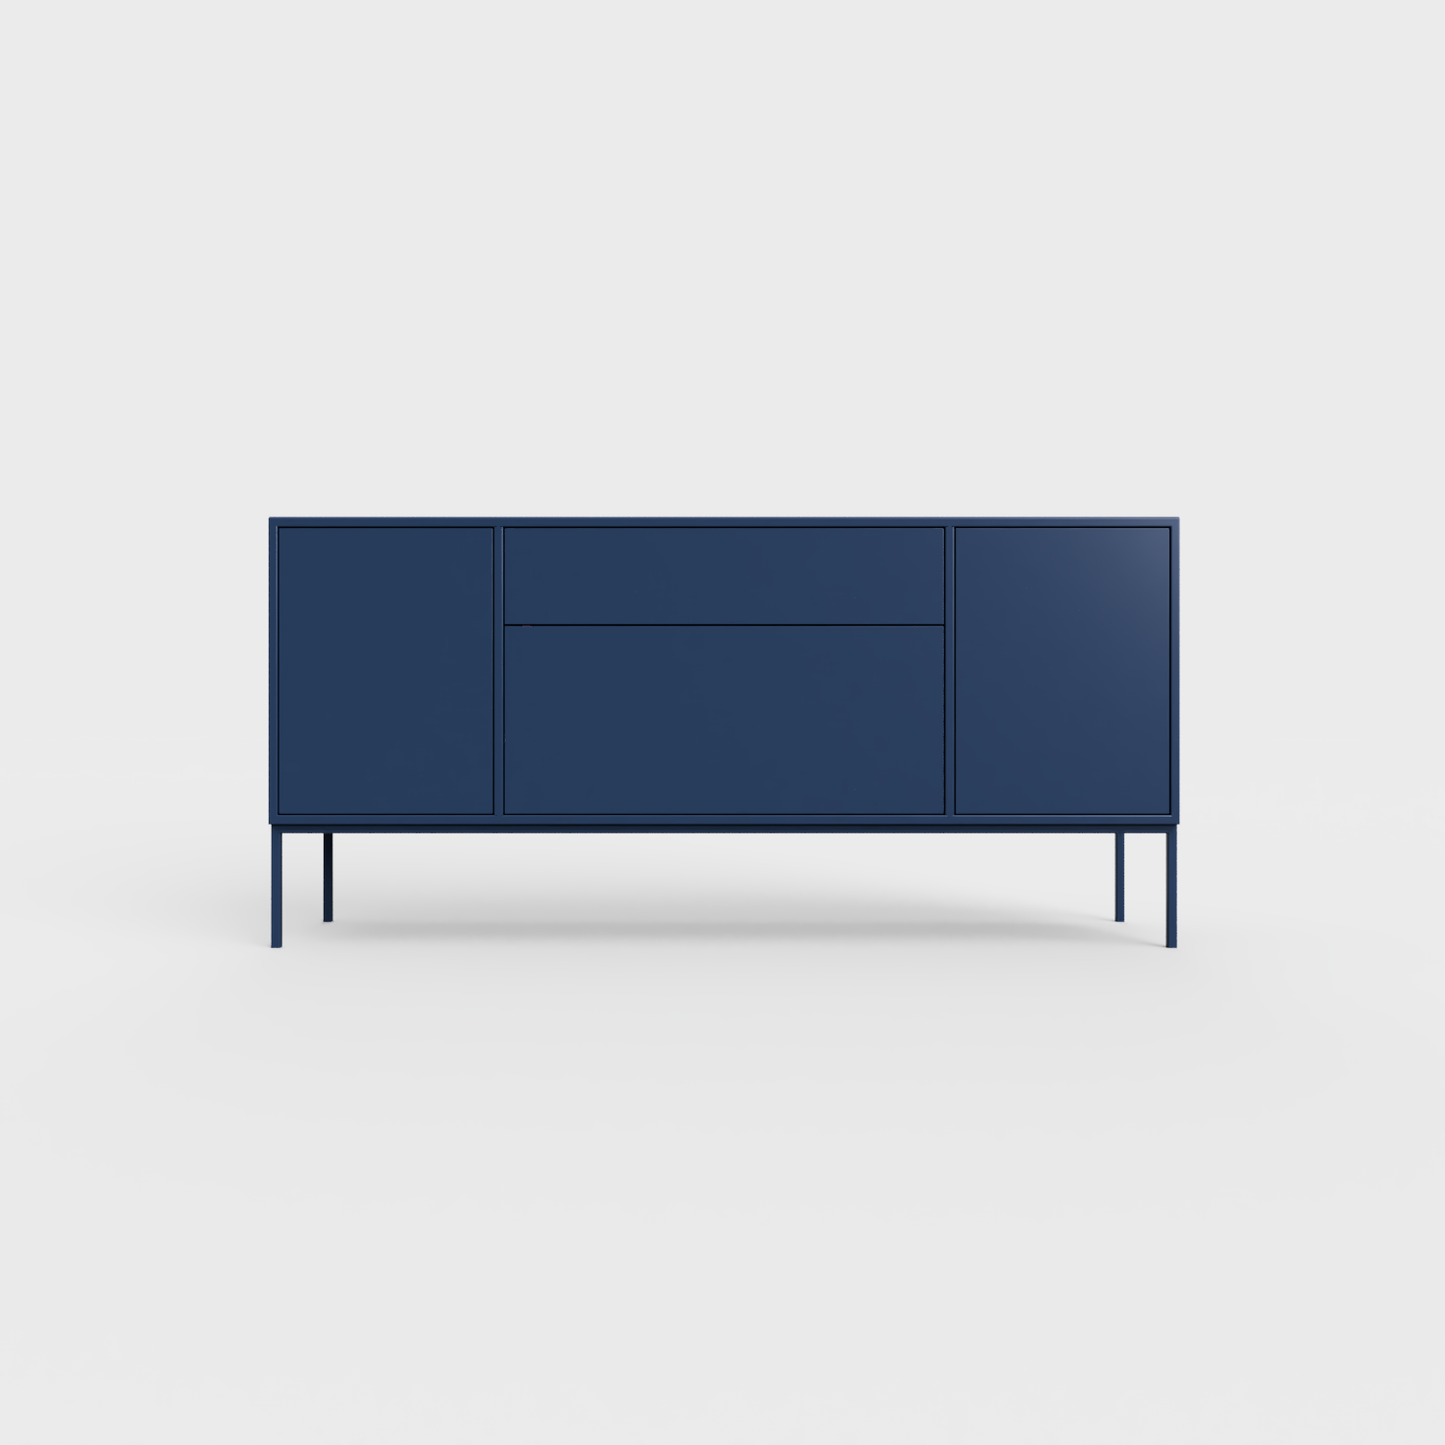 Arnika 02 Sideboard in Prussian Blue color, powder-coated steel, elegant and modern piece of furniture for your living room